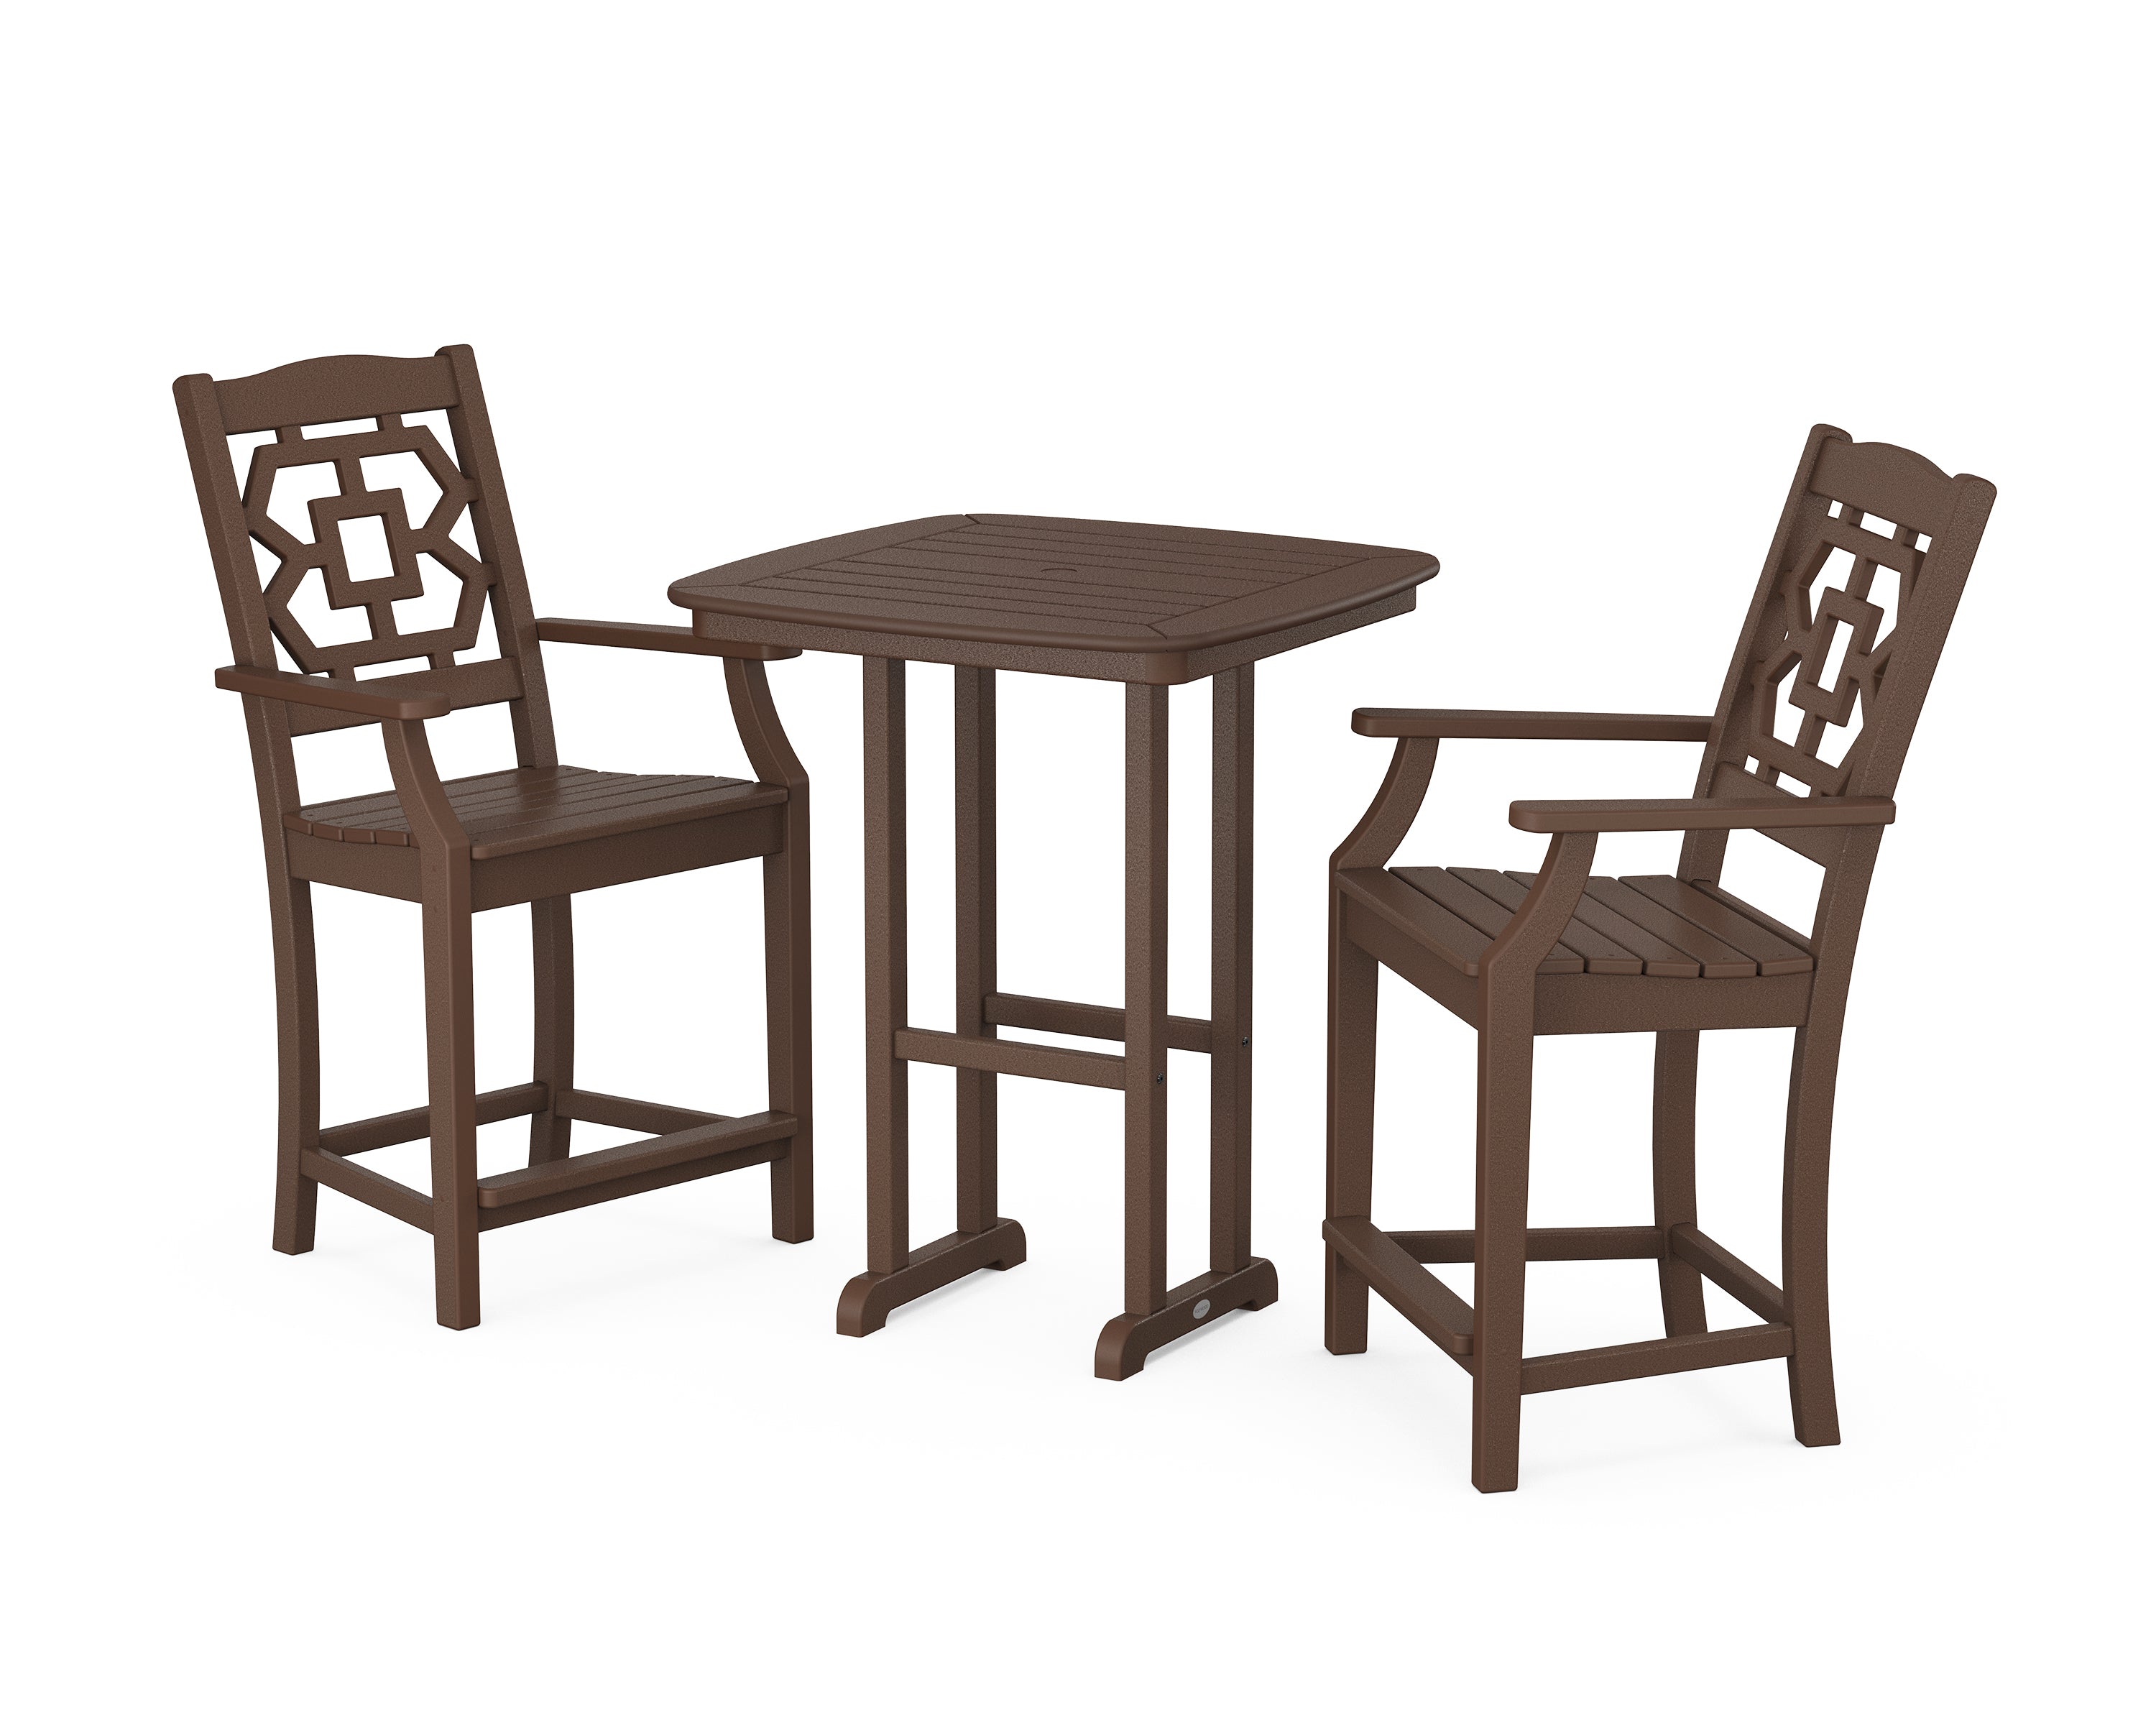 Martha Stewart by POLYWOOD® Chinoiserie 3-Piece Counter Set in Mahogany